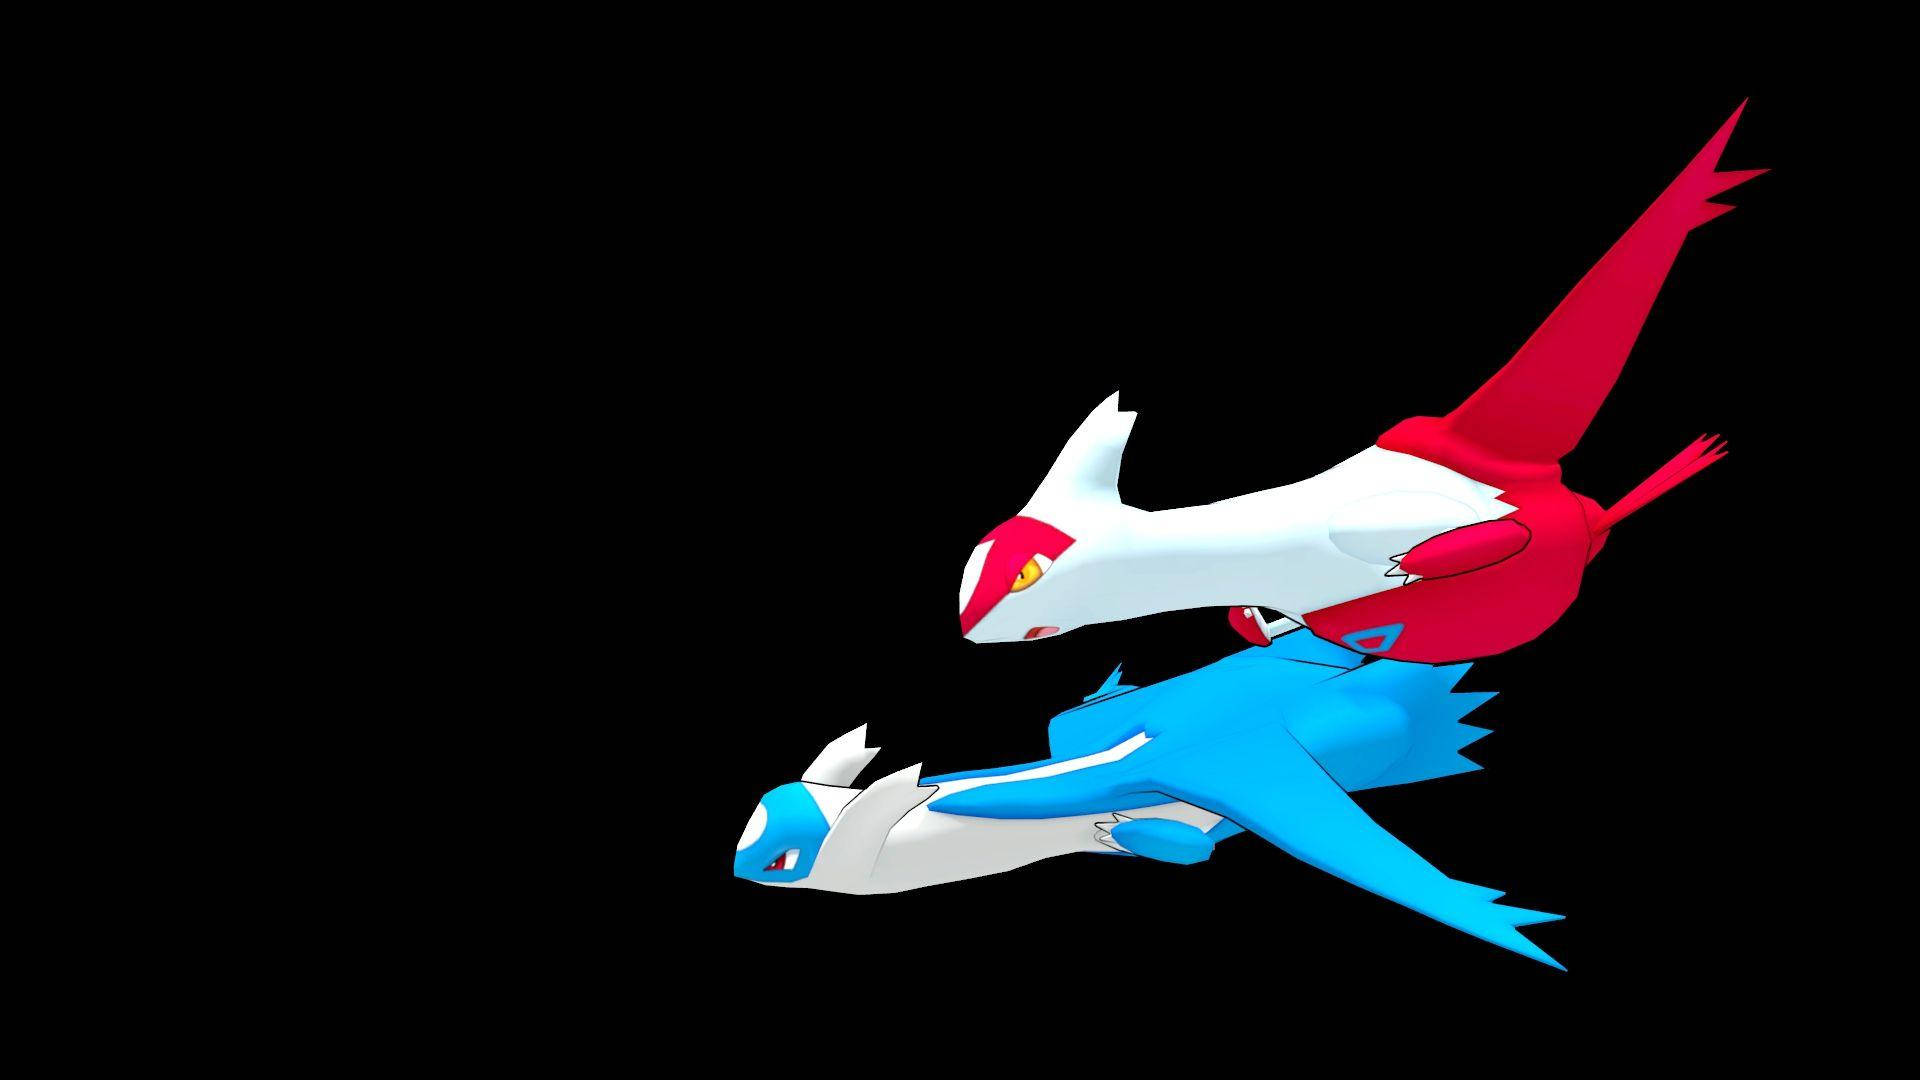 Caption: The Mighty Salamence In Full Flight Background